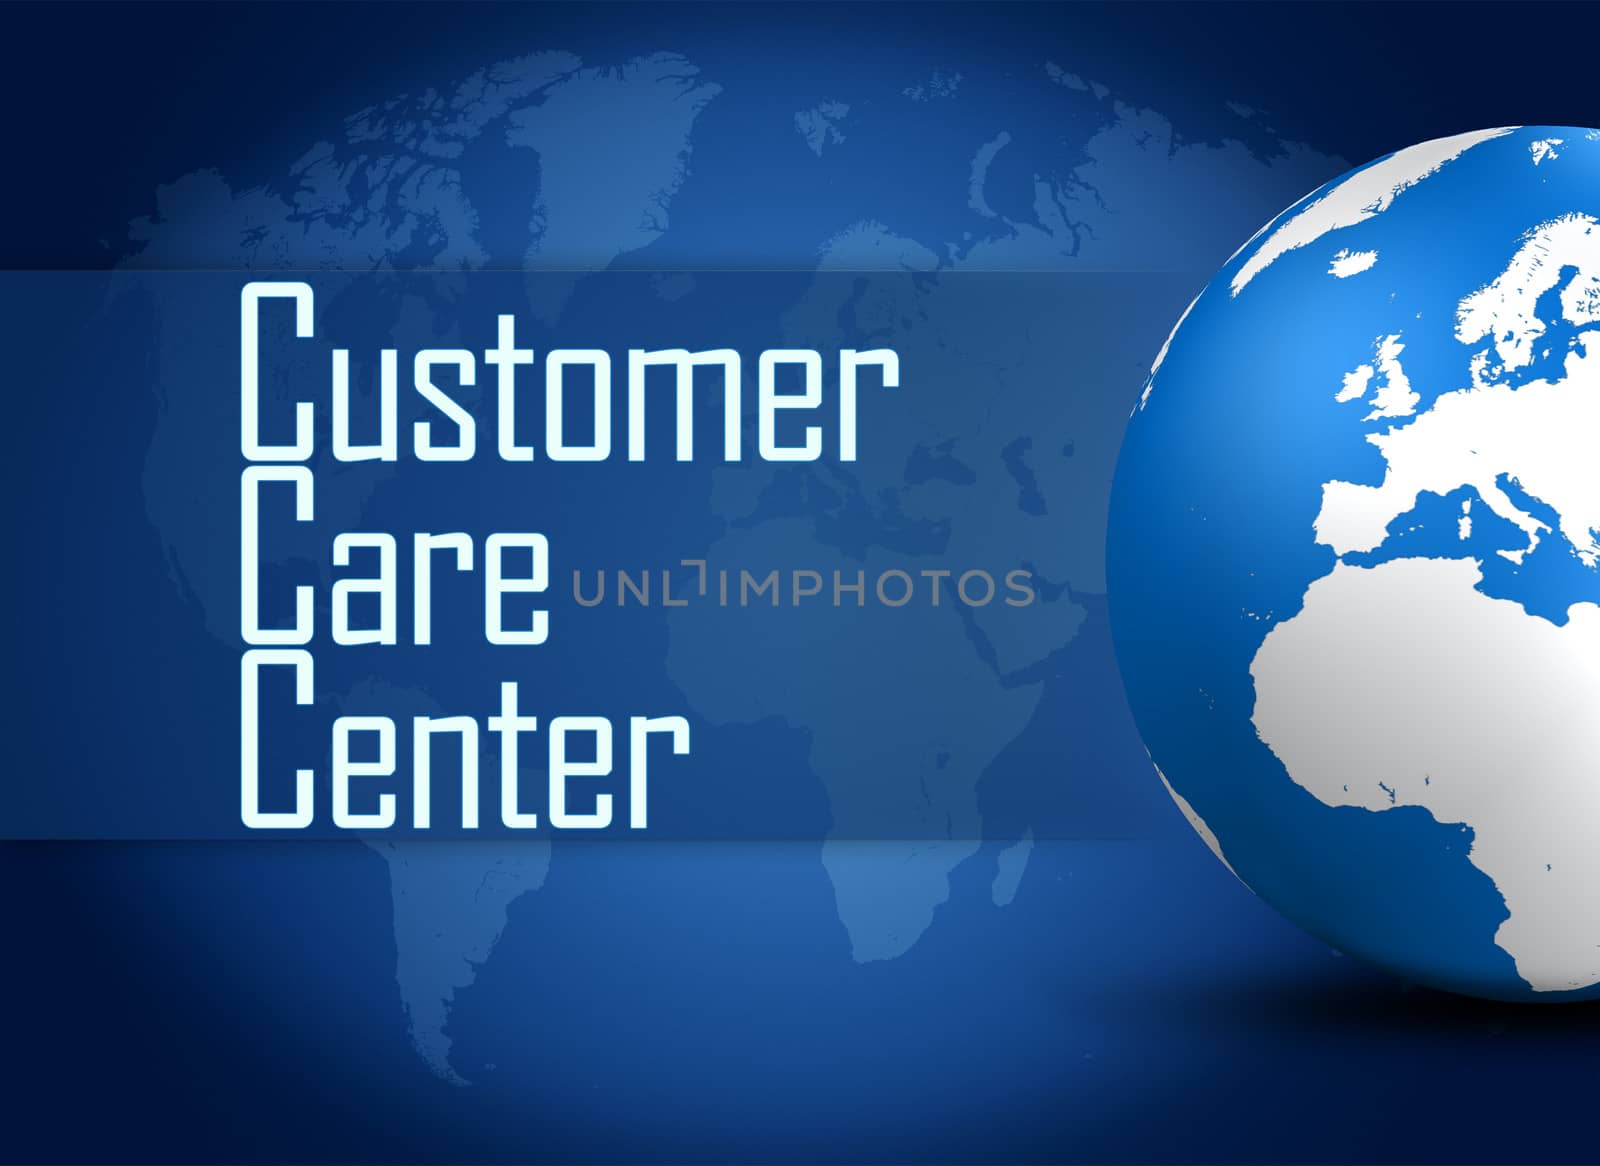 Customer Care Center concept with globe on blue background